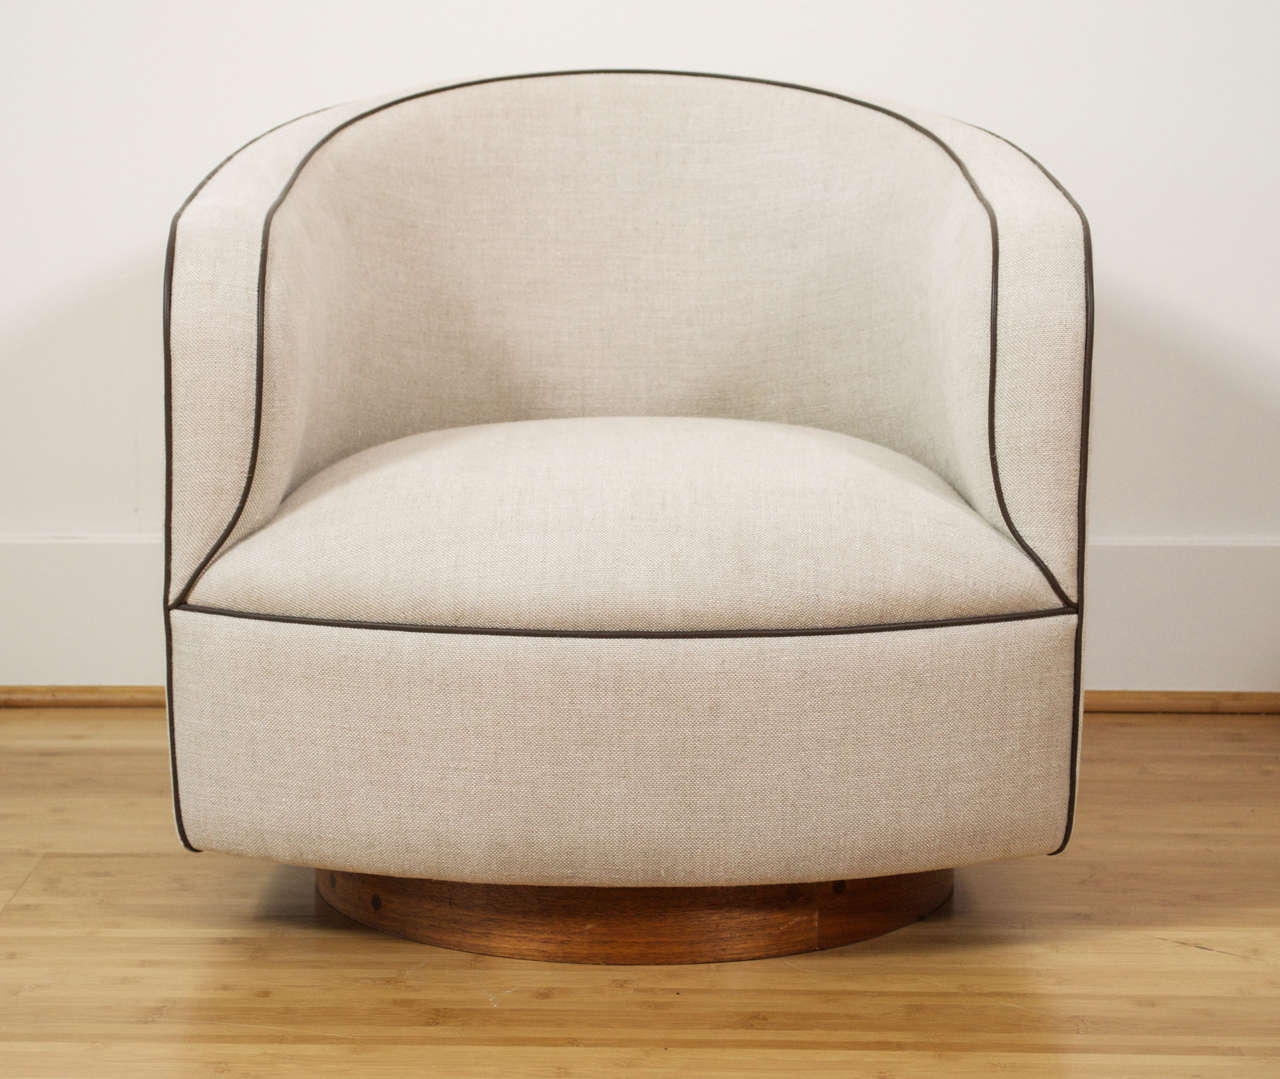 A Barrel shaped club chair by Milo Baughman for Thayer Coggin.
Features a low seat, and wide walnut base. Shown in beige linen, with contrasting brown piping. Base, upholstery, netting, and foaming newly restored. Pair available.